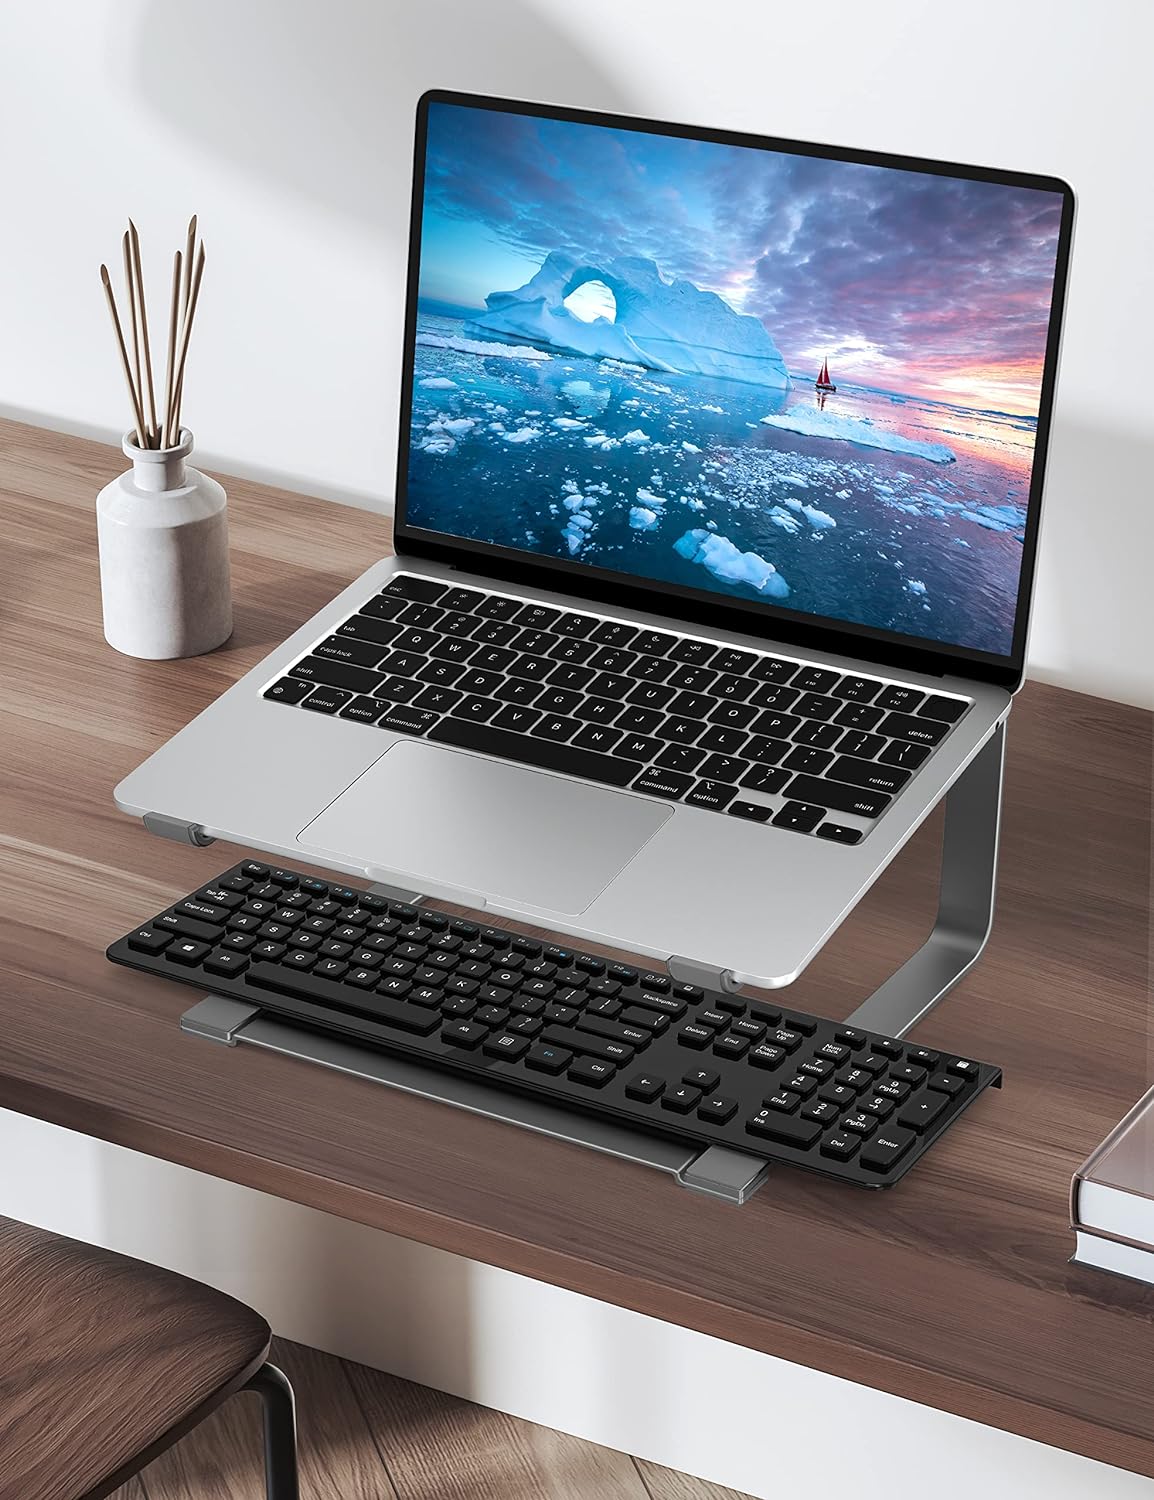 SOUNDANCE Laptop Stand for Desk, Metal Computer Riser, Heavy Stable PC Holder, Ergonomic Laptops Elevator for 12 to 17.3 Inches Notebook Computer, Grey